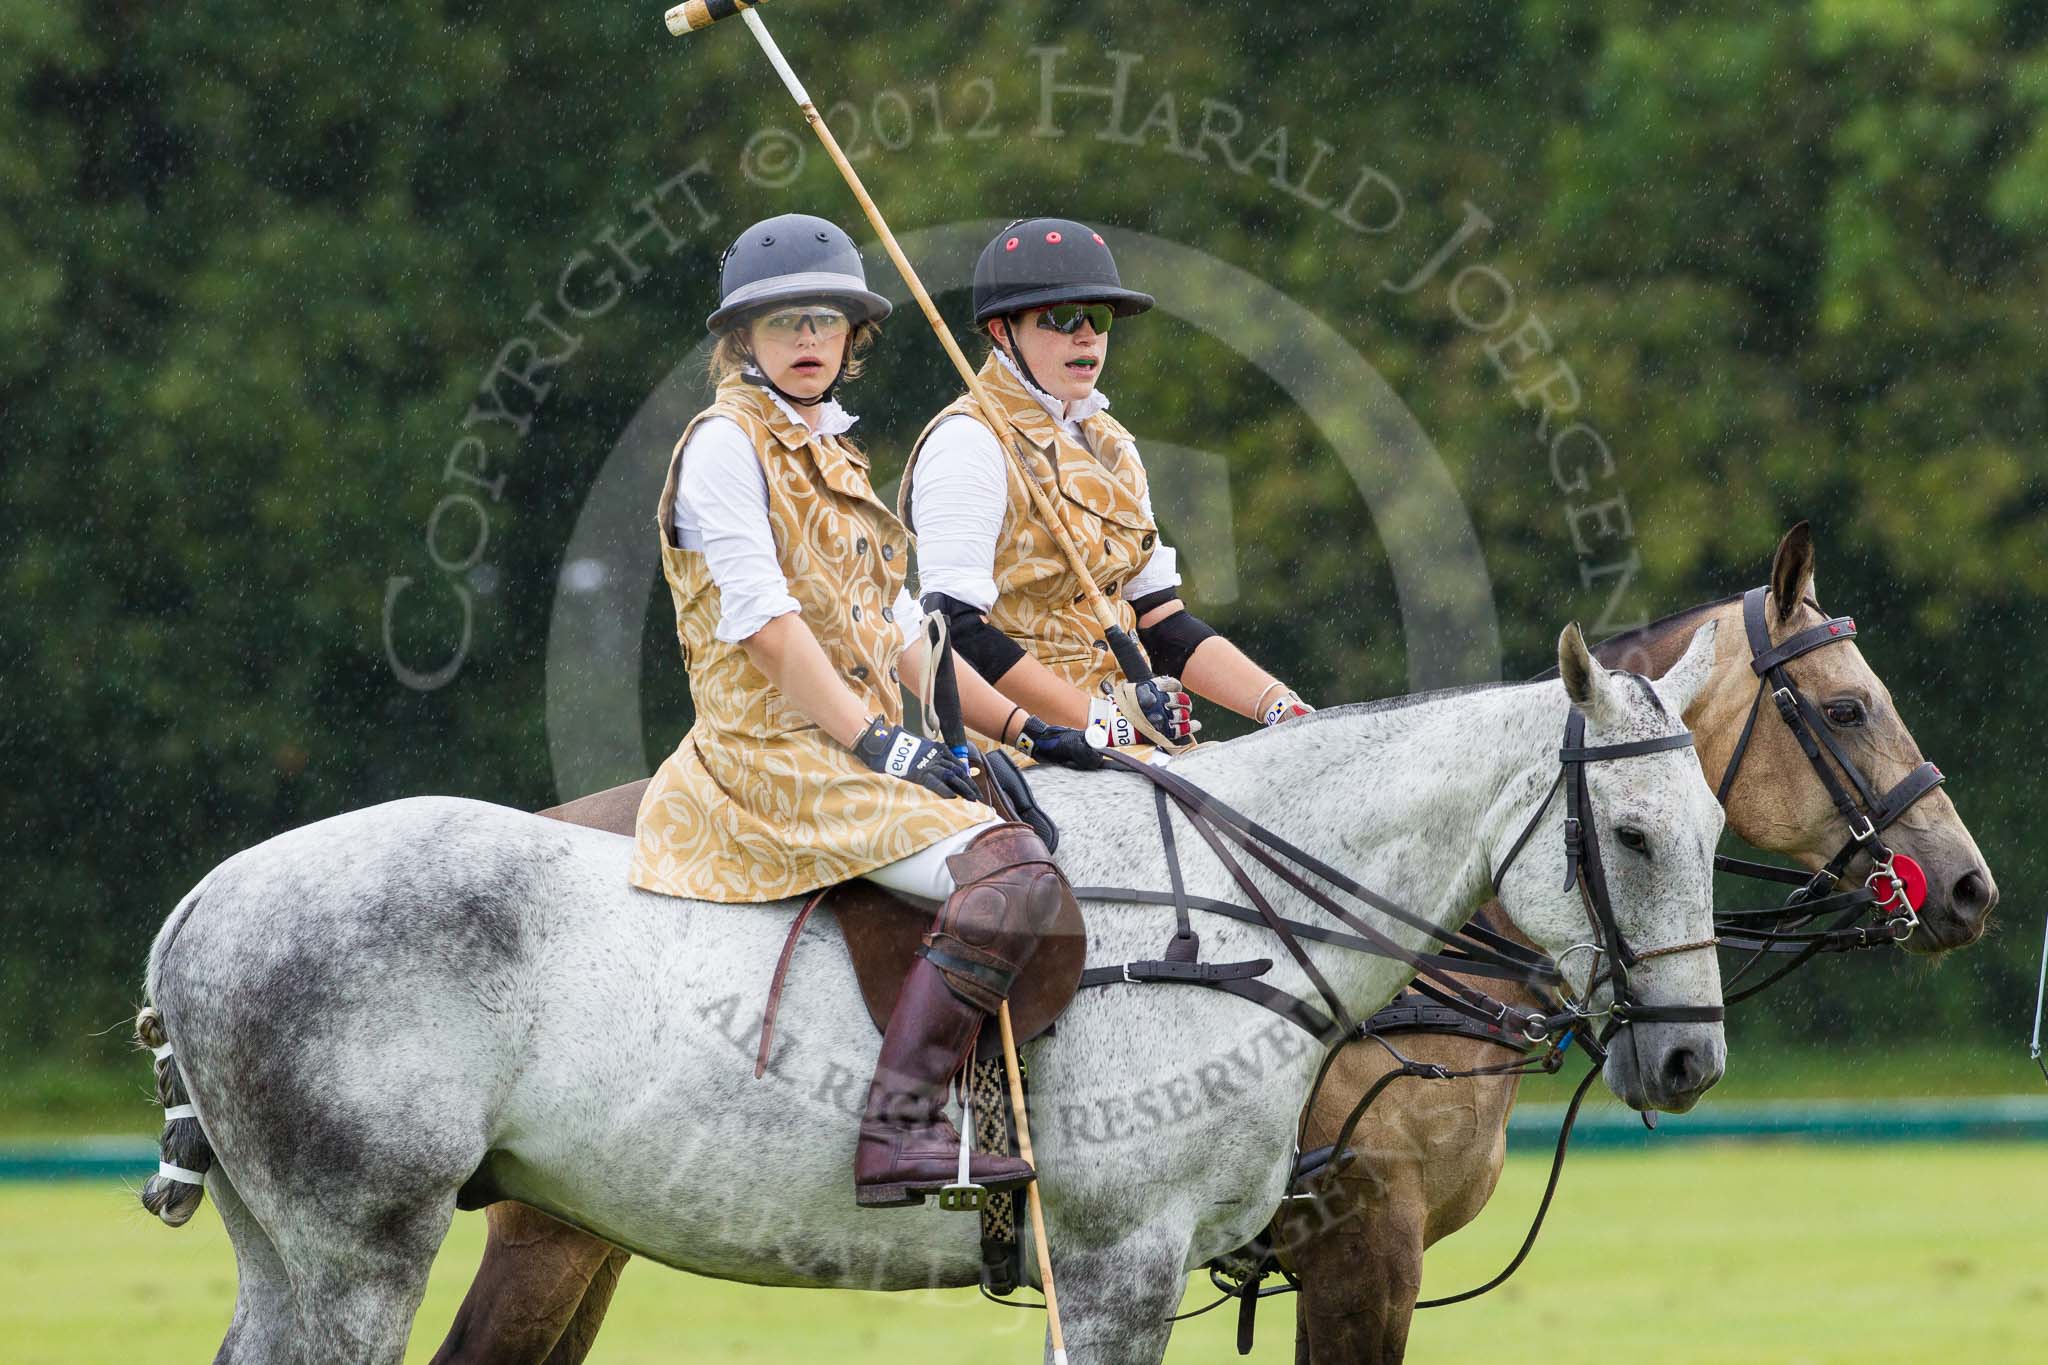 7th Heritage Polo Cup semi-finals: The Amazons of Polo sponsored by Polistas - Emma Boers (-1) GB and Heloise Lorentzen (1) GB..
Hurtwood Park Polo Club,
Ewhurst Green,
Surrey,
United Kingdom,
on 04 August 2012 at 13:05, image #93